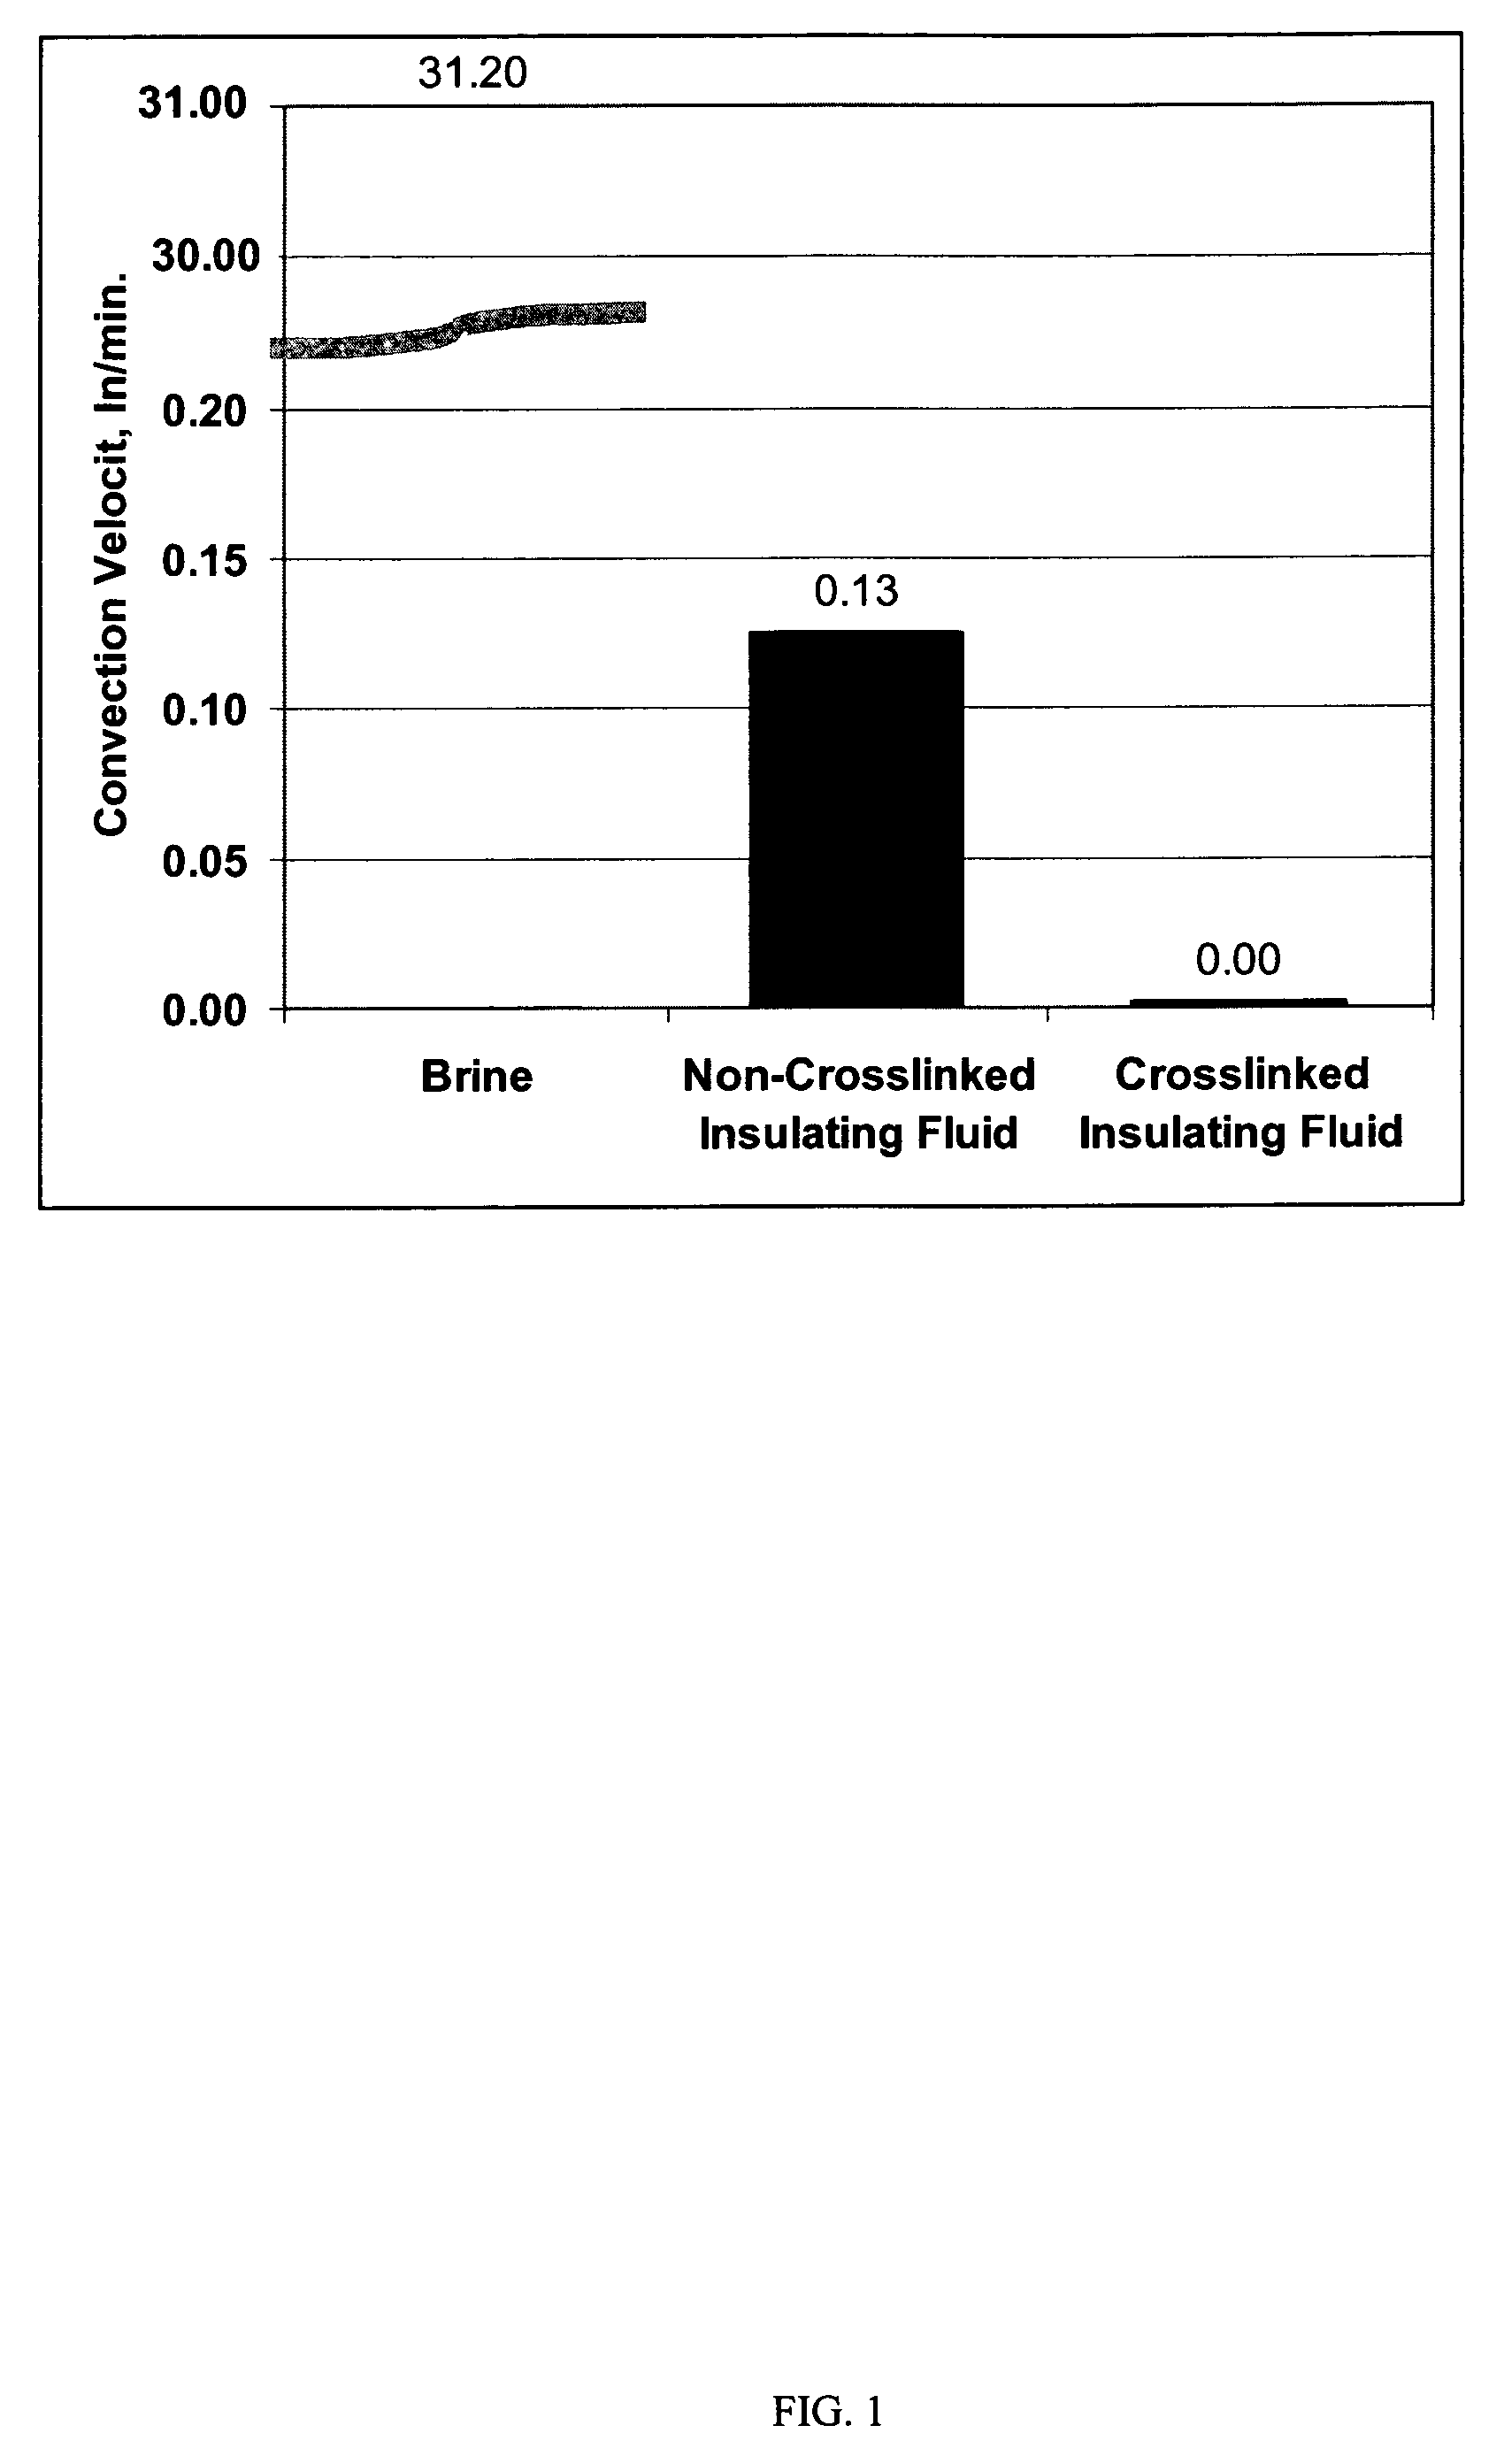 Crosslinkable thermal insulating compositions and methods of using the same